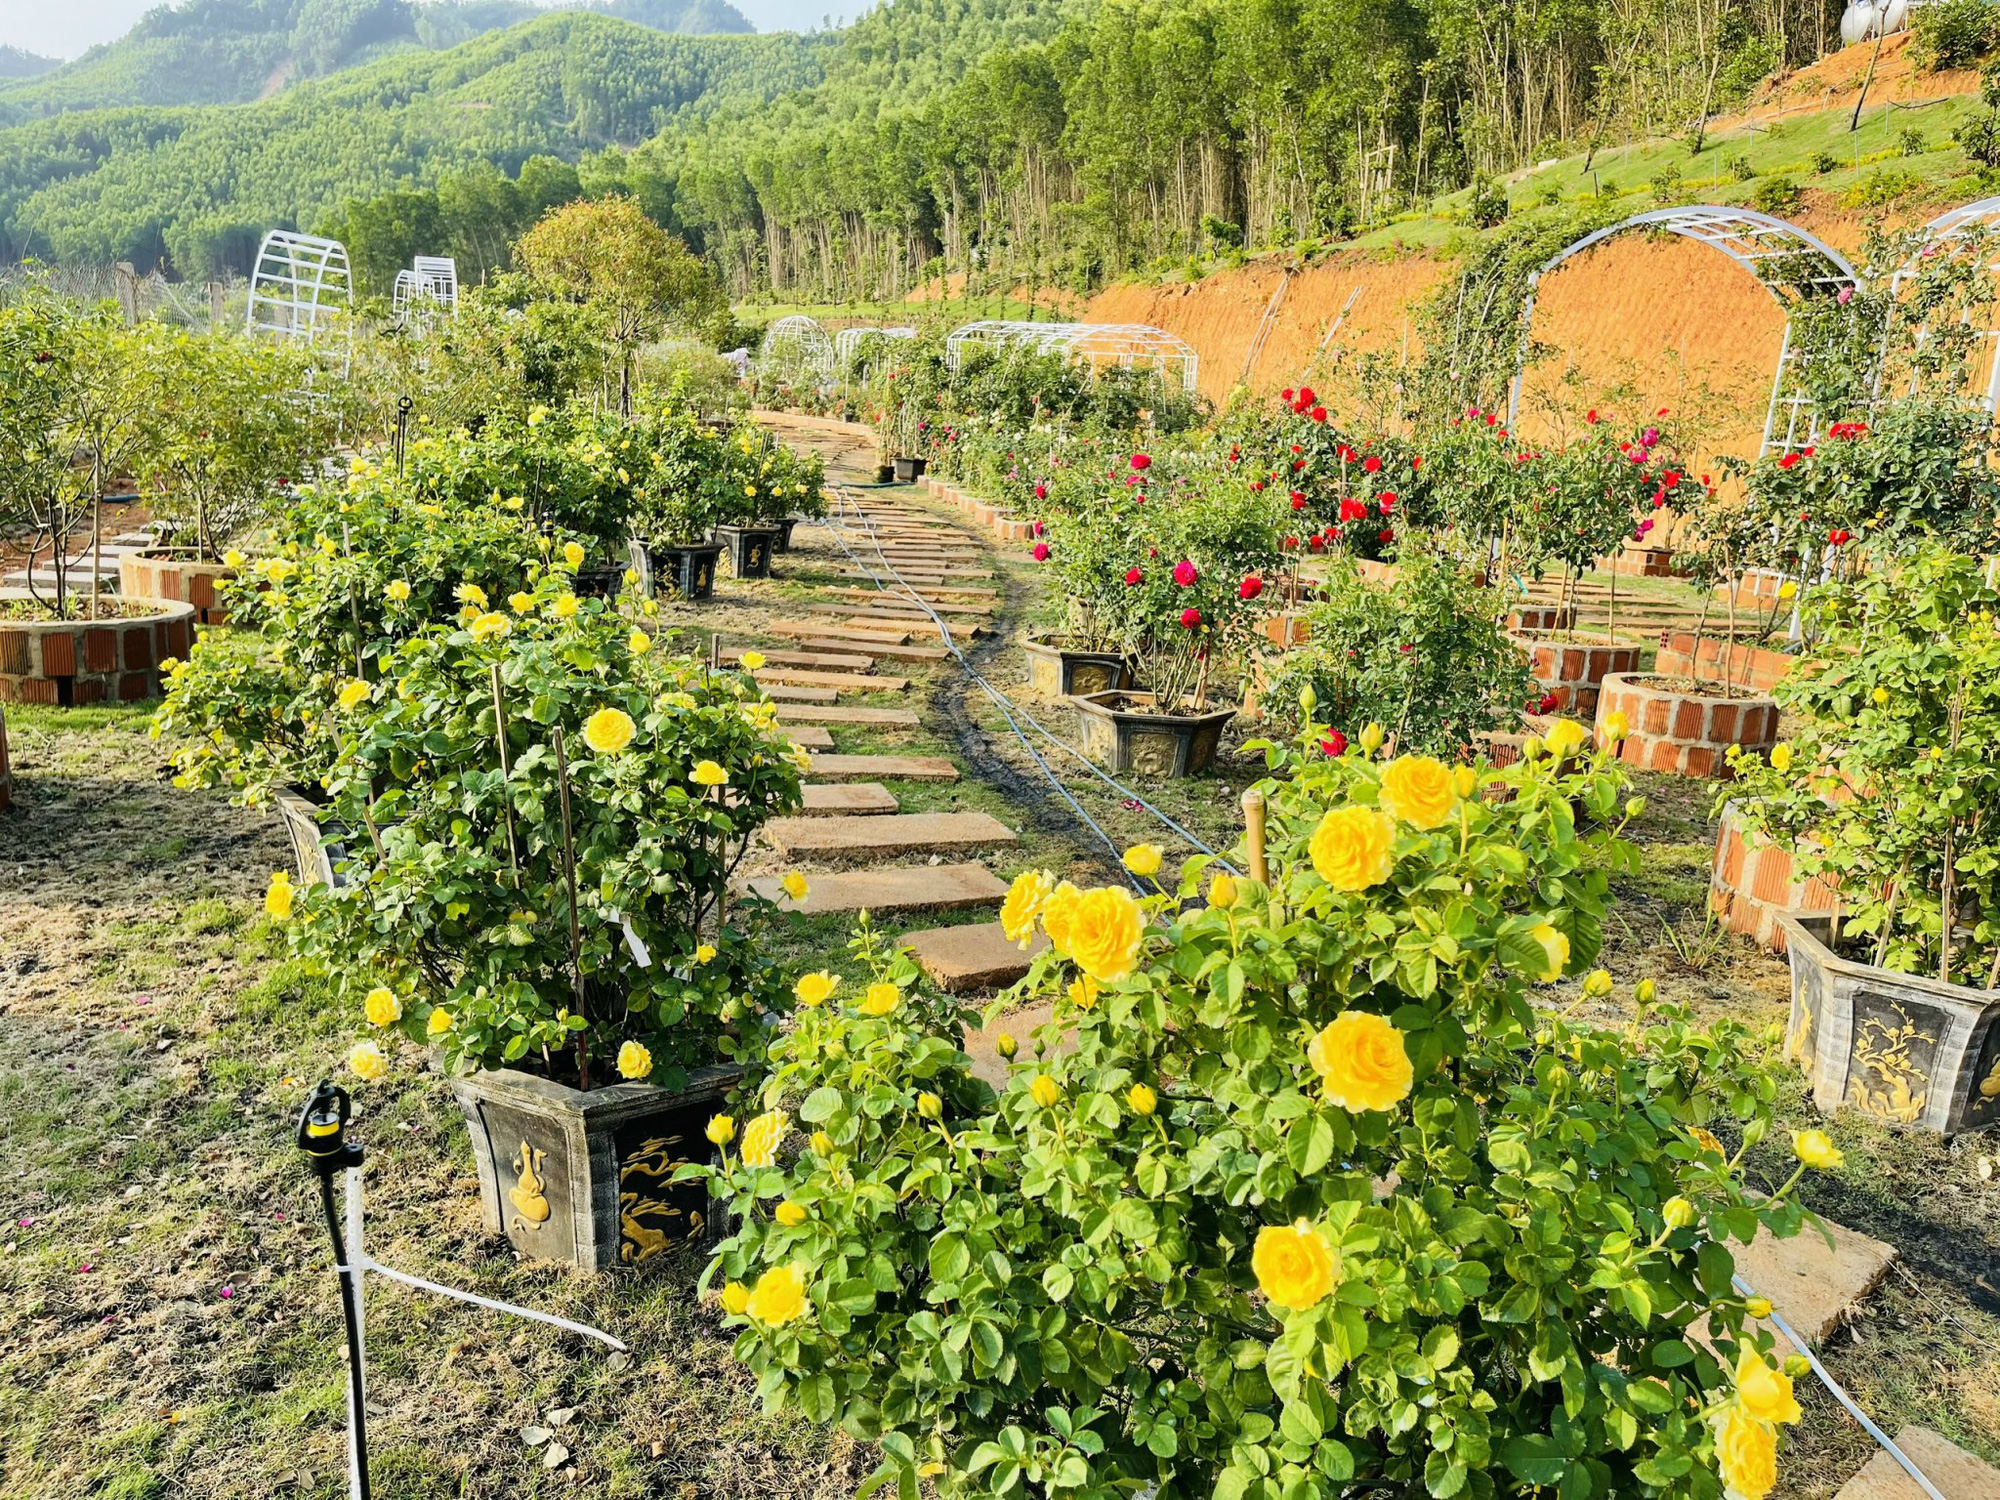 Cannot take their eyes off the beautiful rose garden like paradise of the Central Highlands boy - Photo 11.